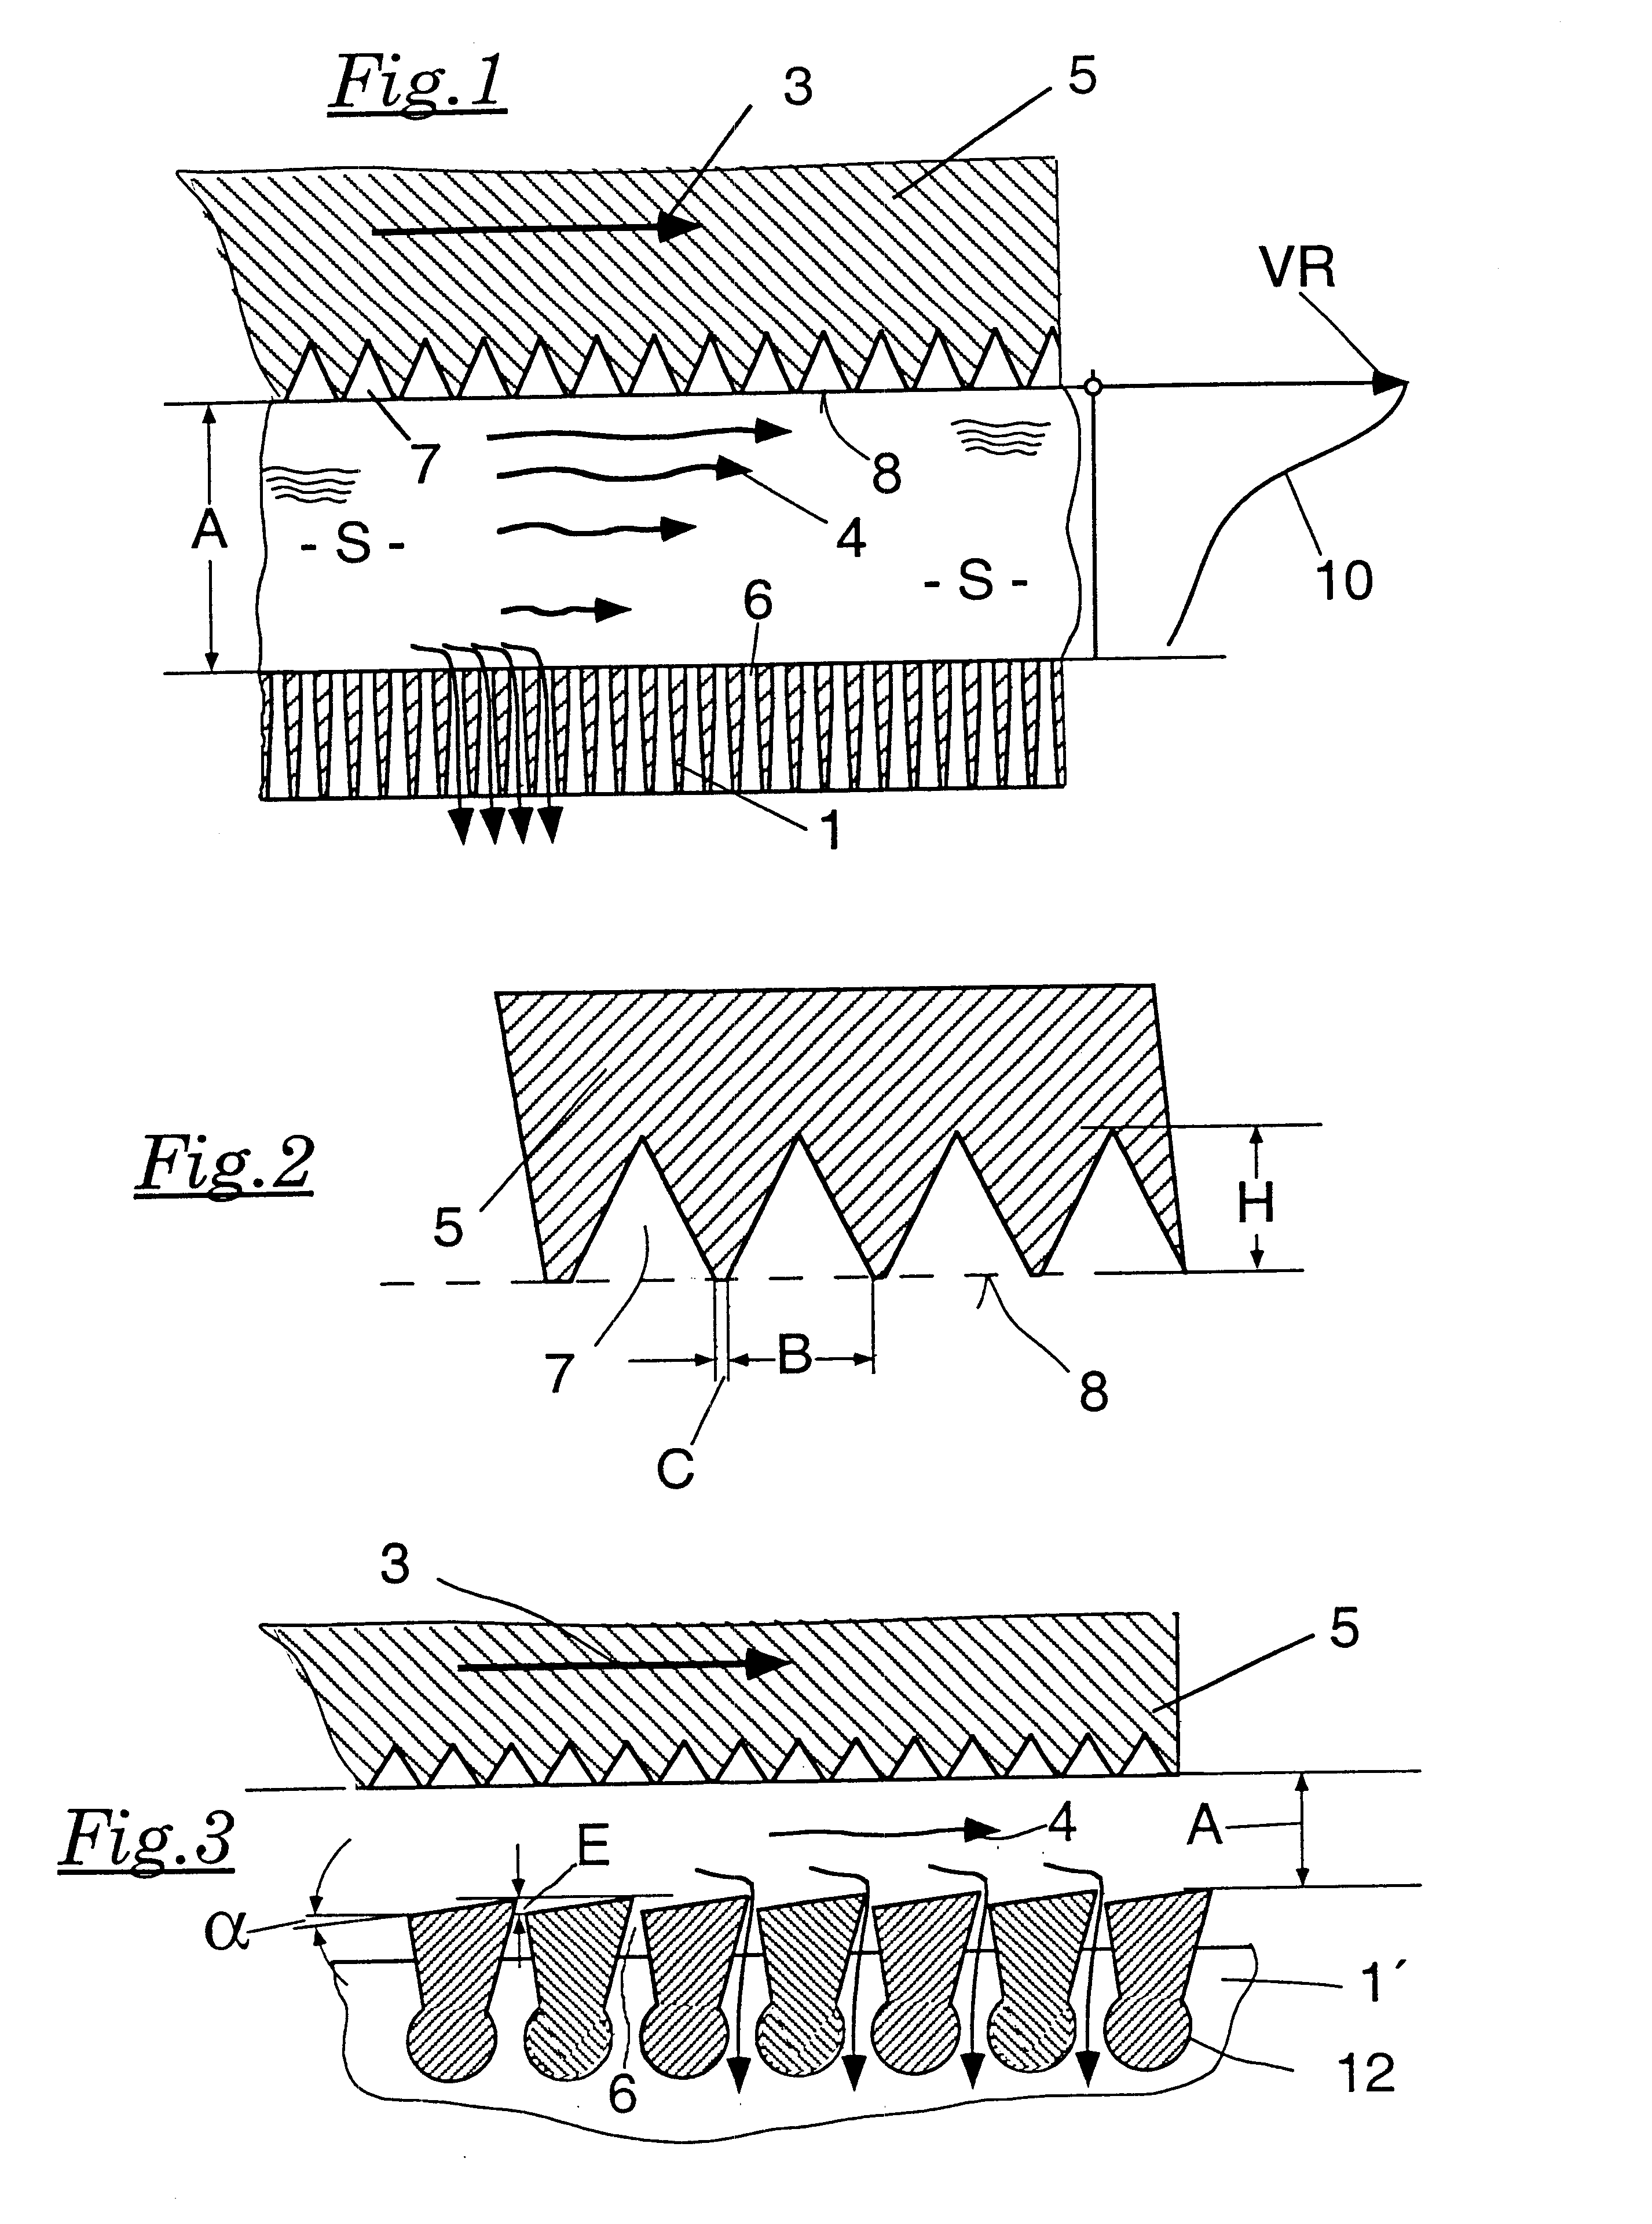 Process and device for fractioning a suspension containing paper fibers